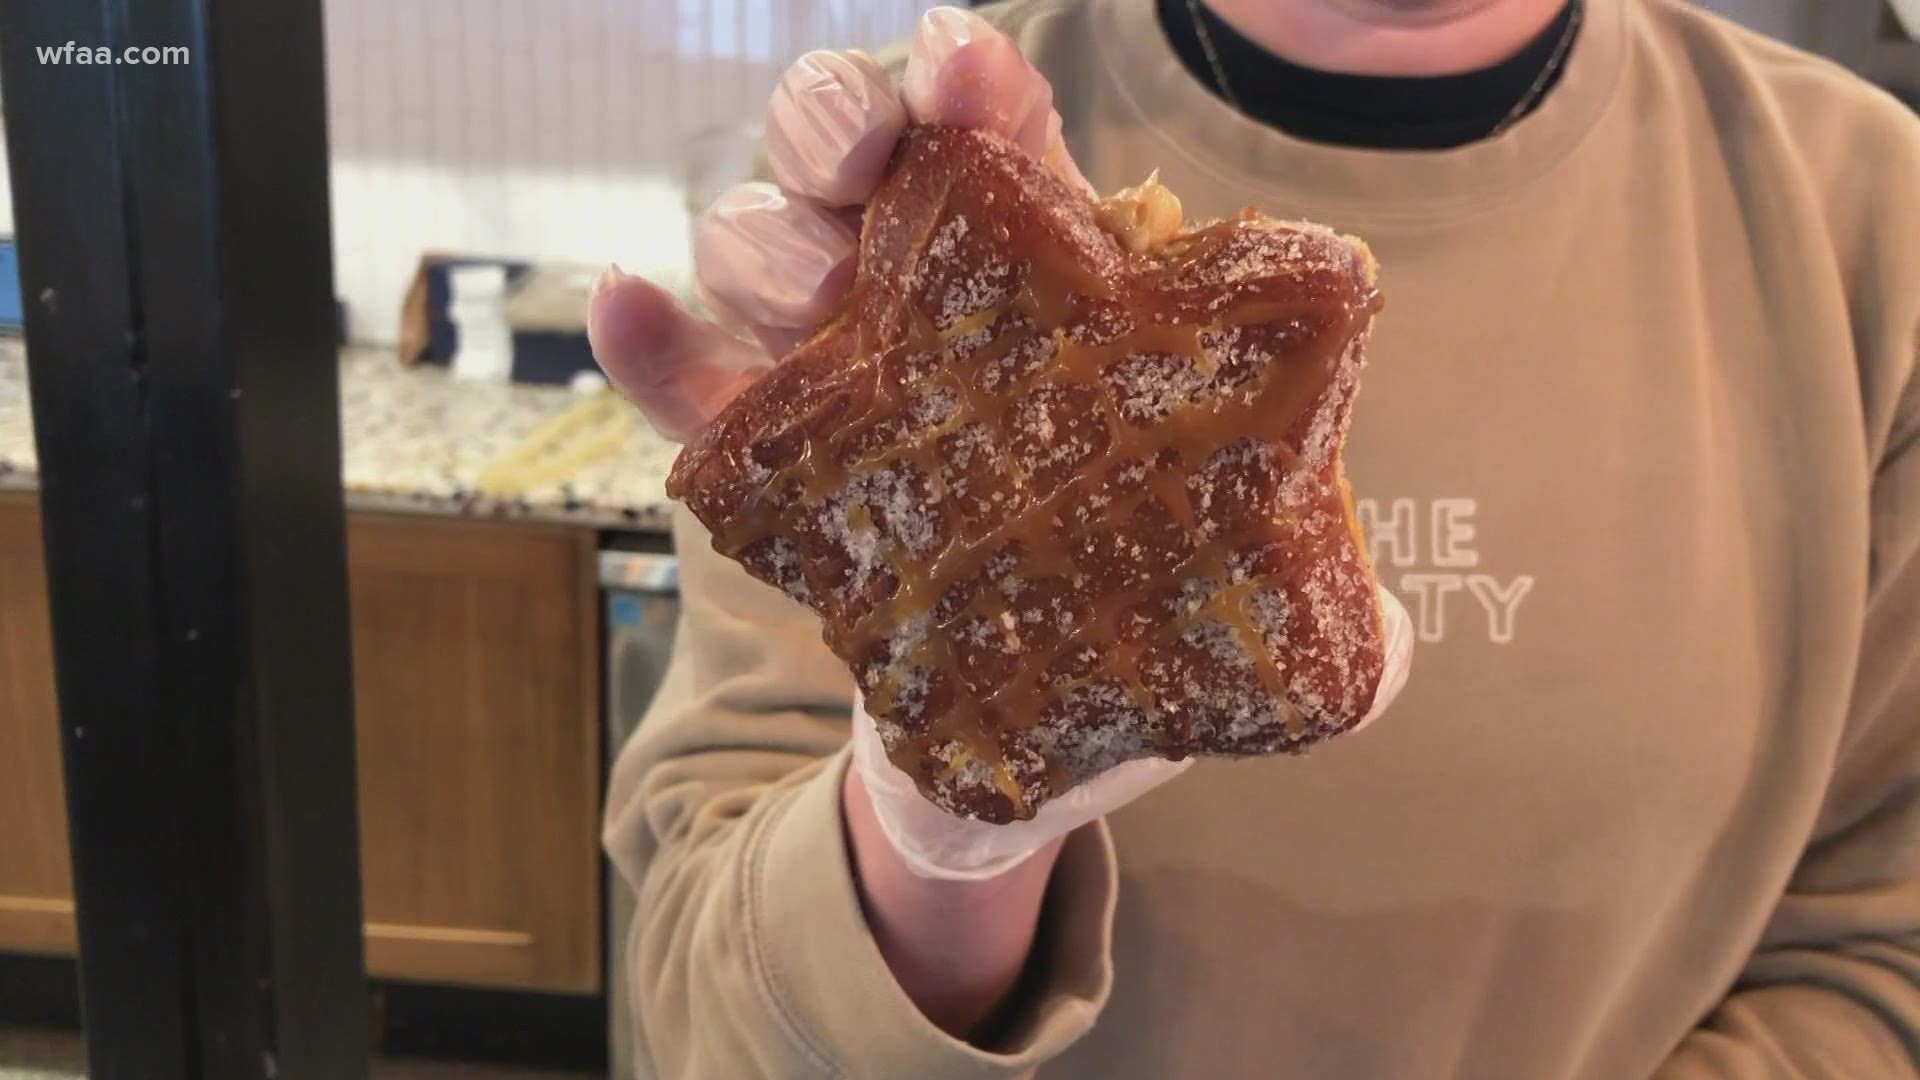 The Churro and Dulce de Leche Star donut is so popular with customers, that Salty Donut in Bishop Arts now offers it year-round.